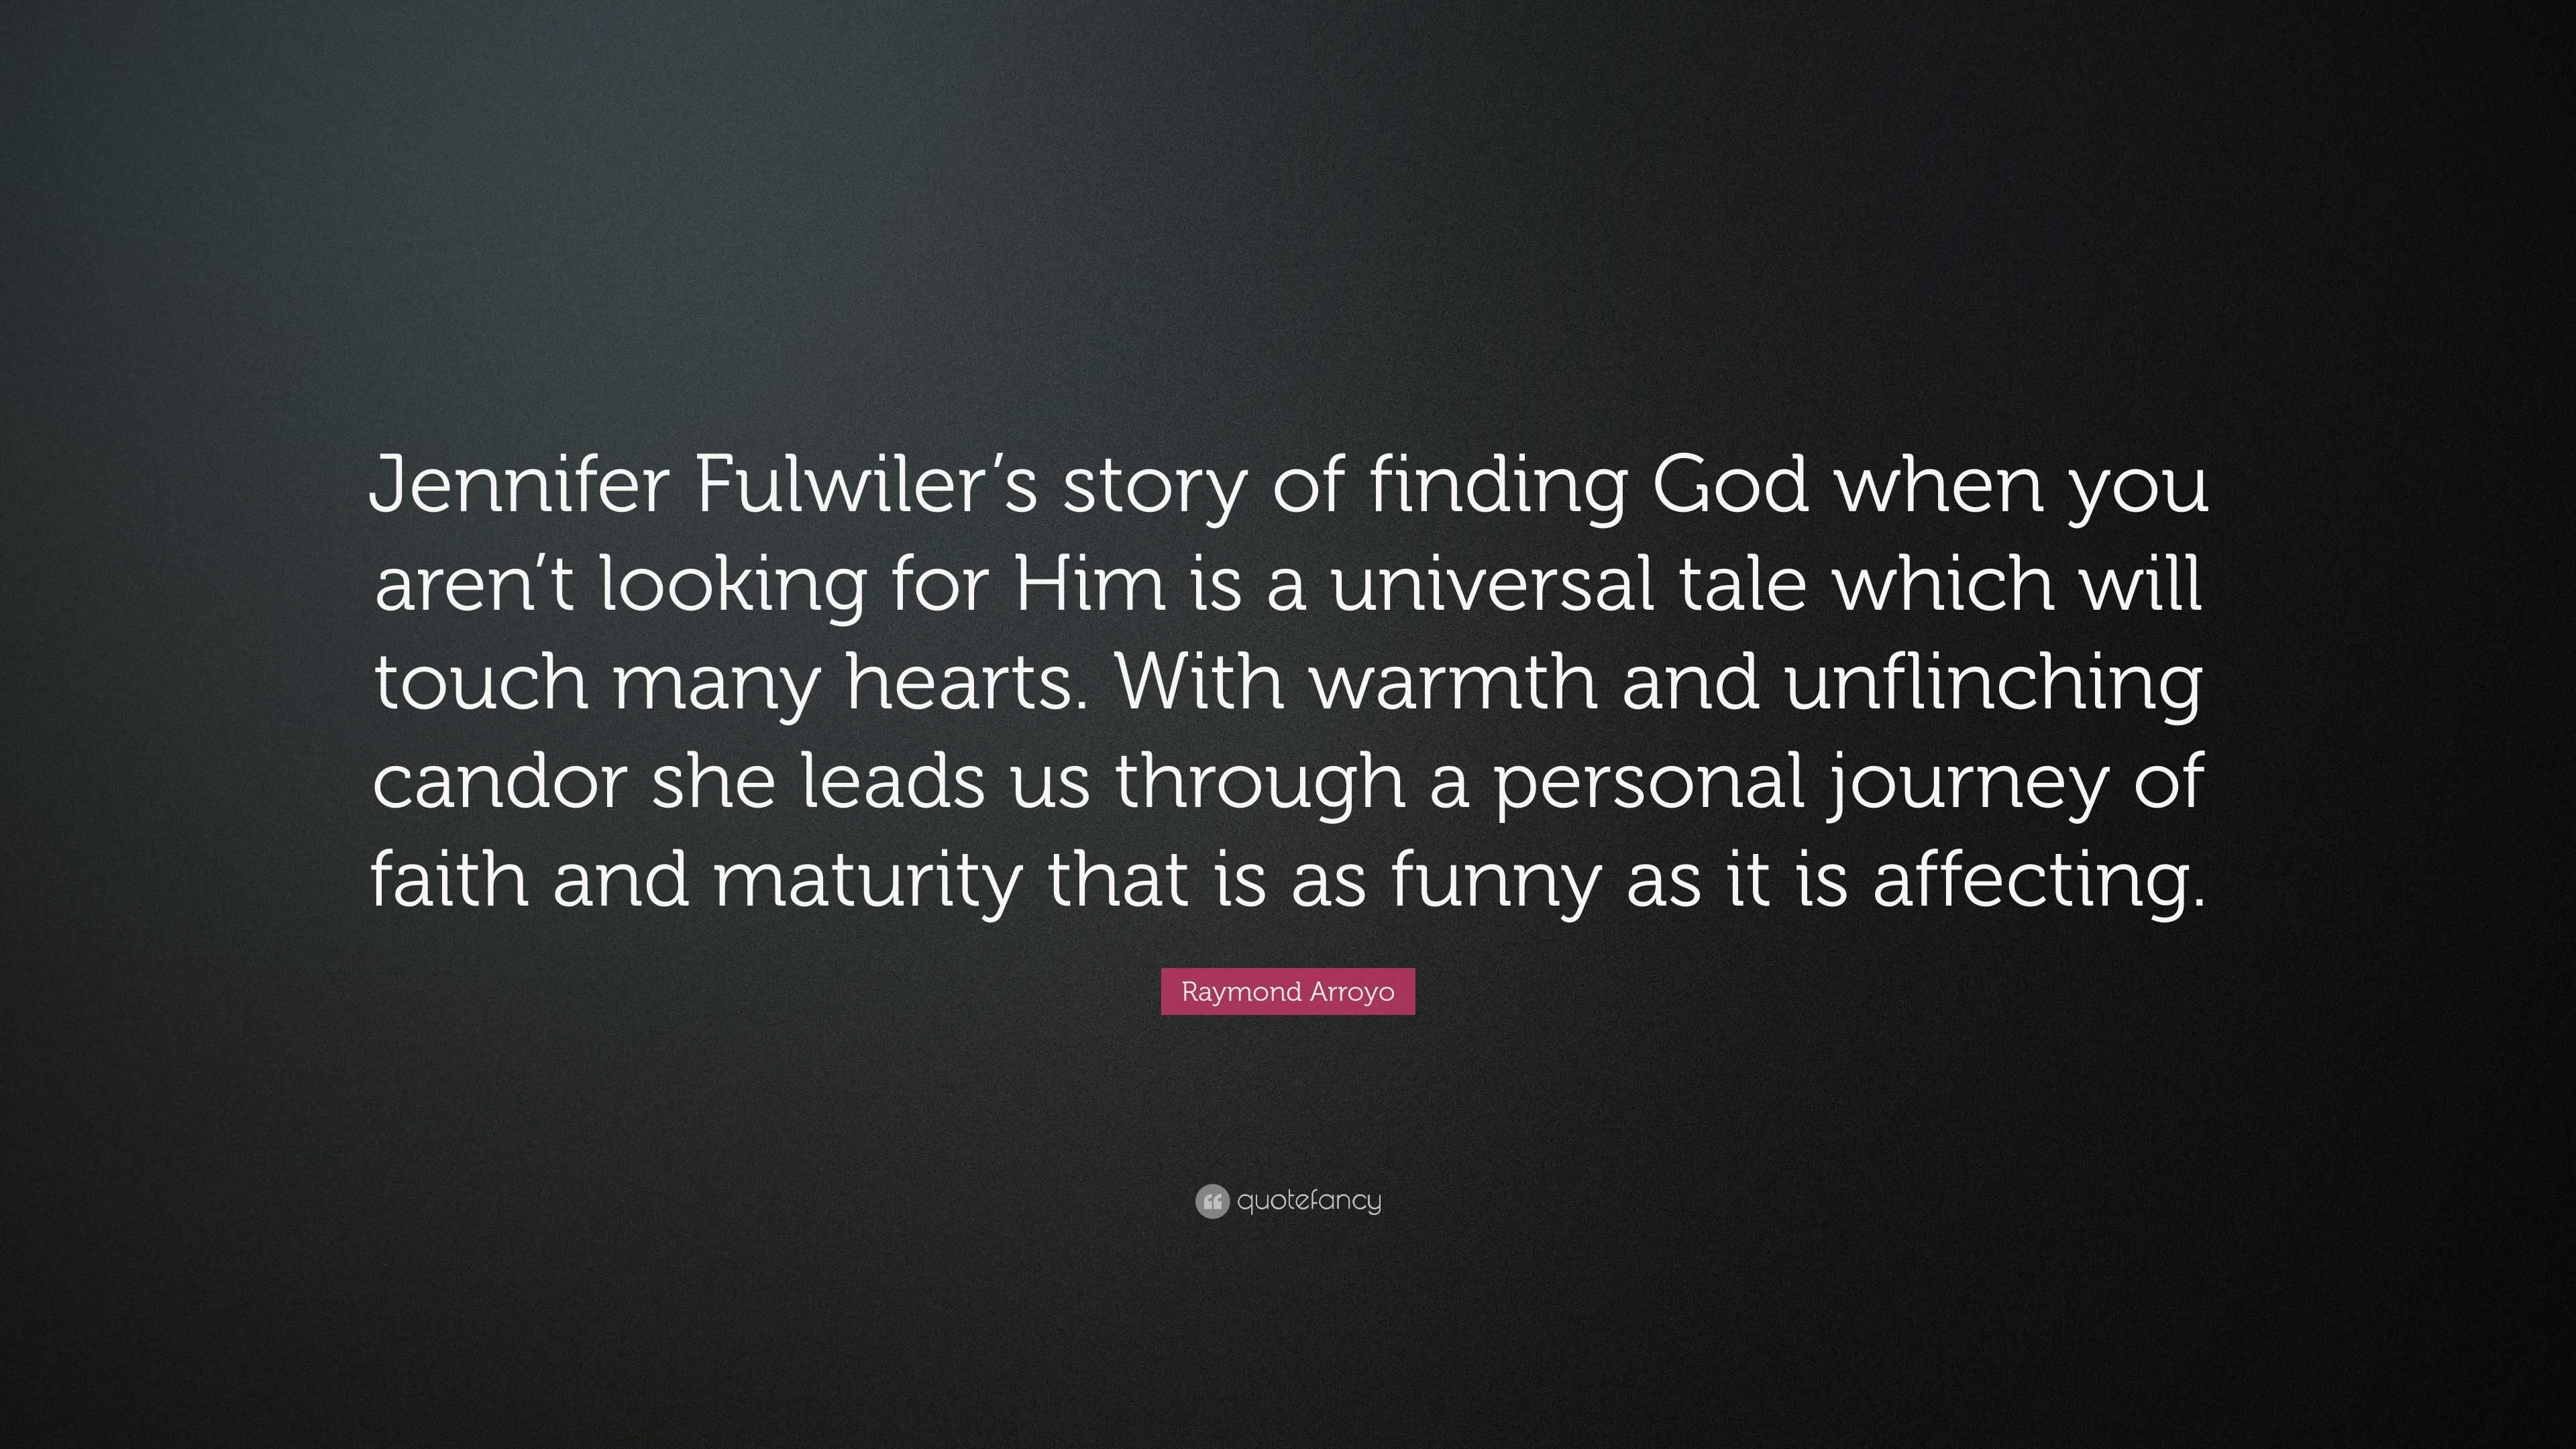 Raymond Arroyo Quote: “Jennifer Fulwiler's story of finding God when you  aren't looking for Him is a universal tale which will touch many heart...”